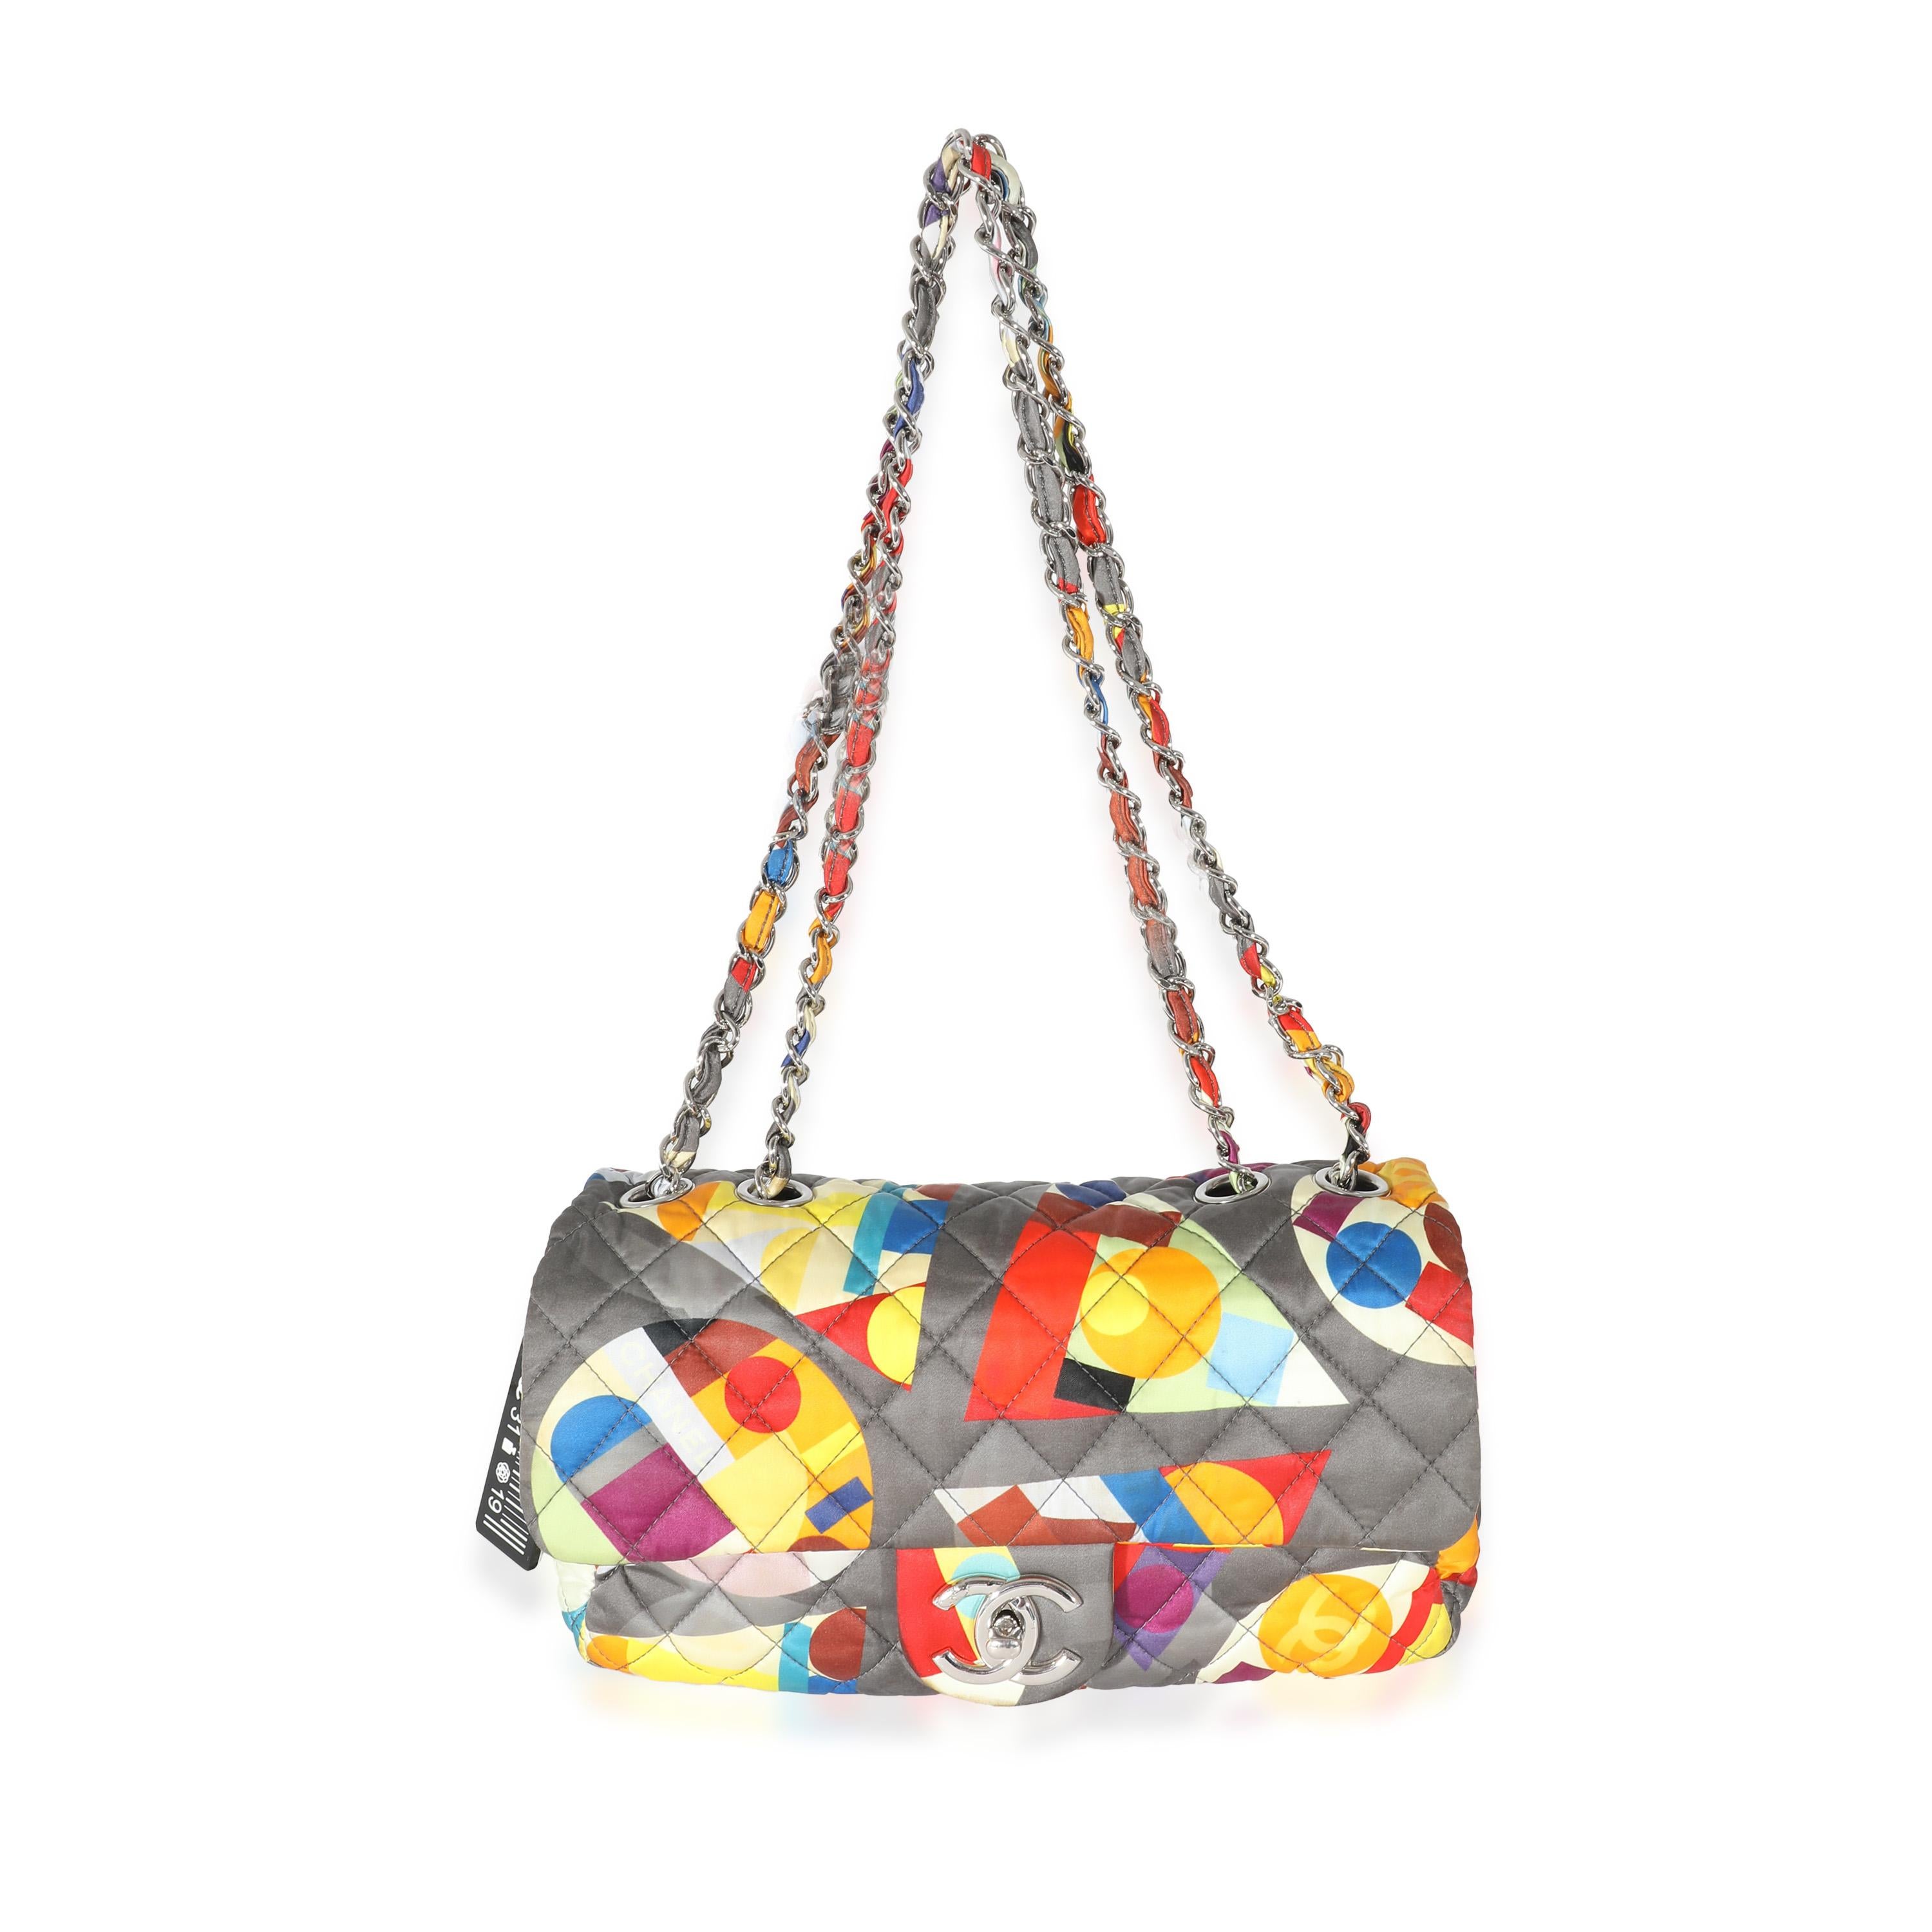 Listing Title: Chanel Multicolor Printed Nylon Medium Coco Color Flap Bag
SKU: 133686
Condition: Pre-owned 
Condition Description: A timeless classic that never goes out of style, the flap bag from Chanel dates back to 1955 and has seen a number of